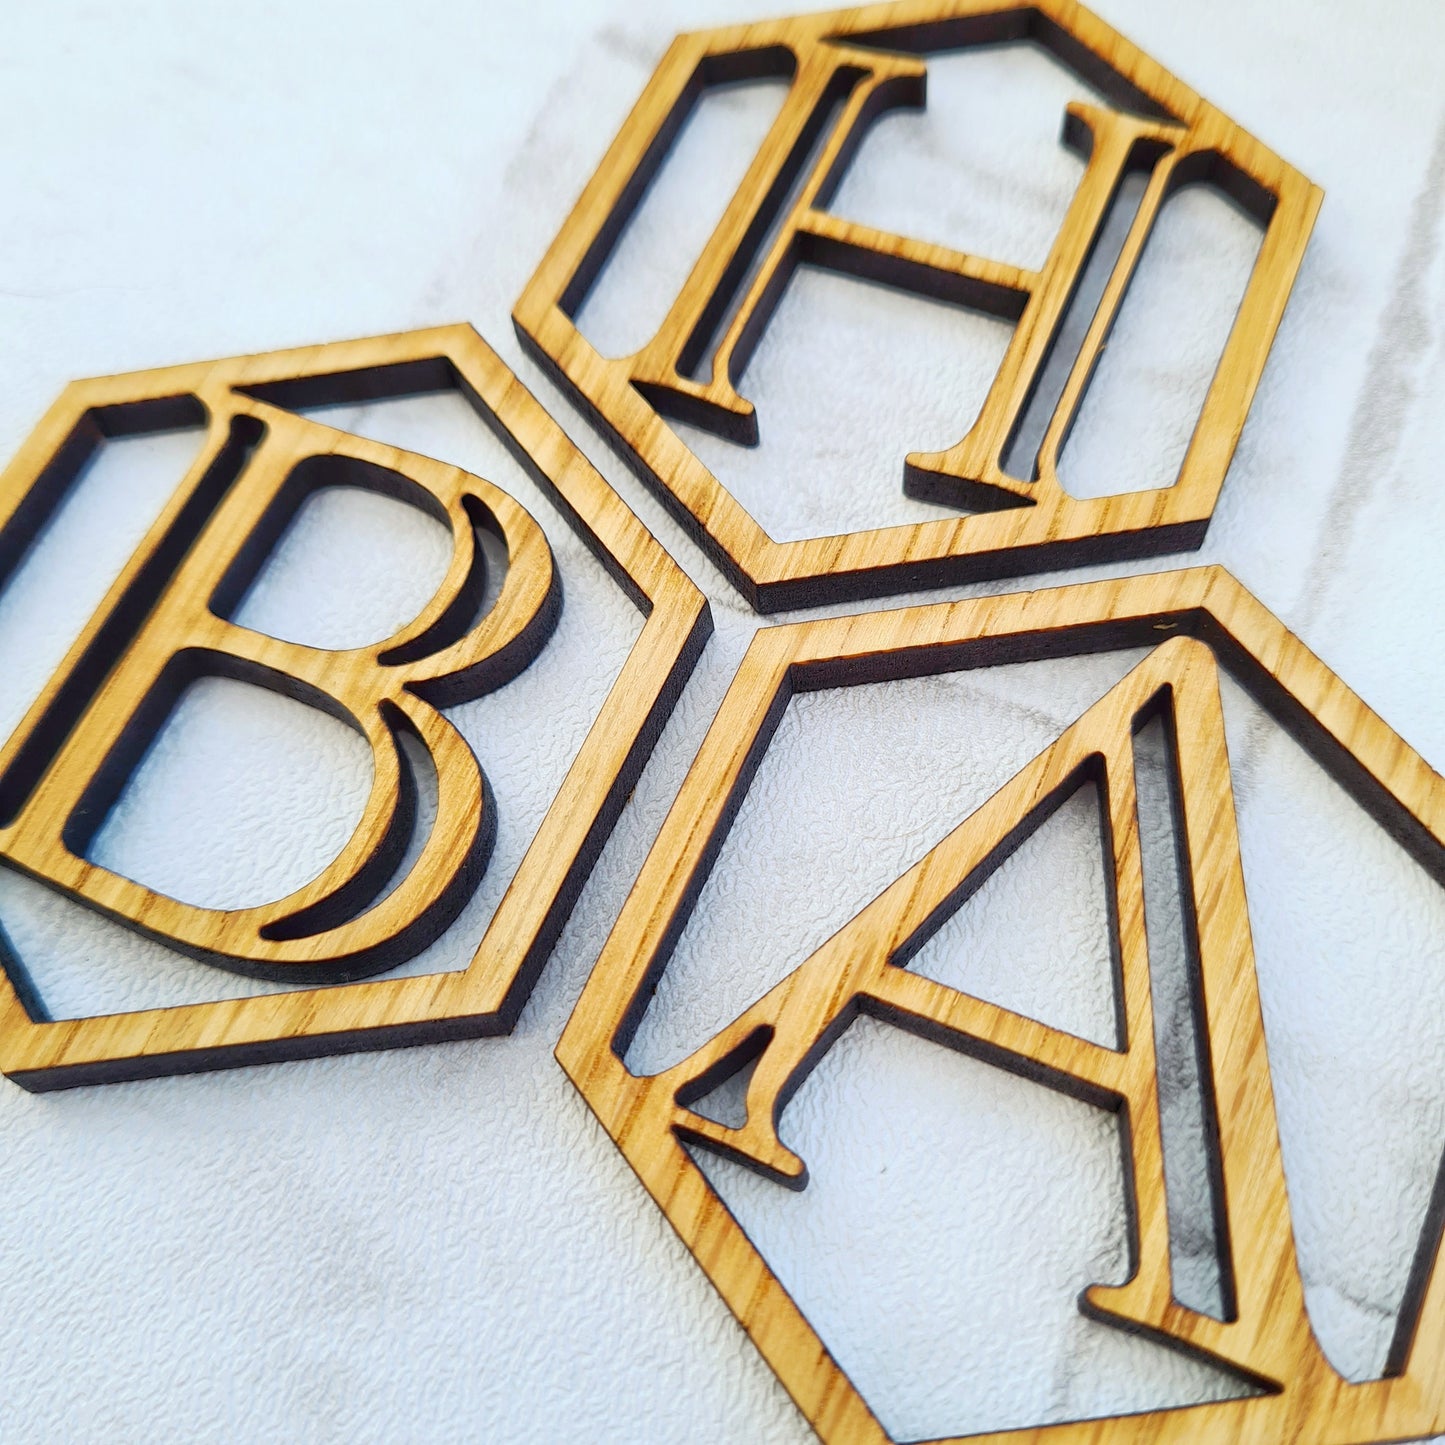 Monogrammed initial gift tag made from wood. Luxury Christmas gift wrapping idea to make Christmas extra special  